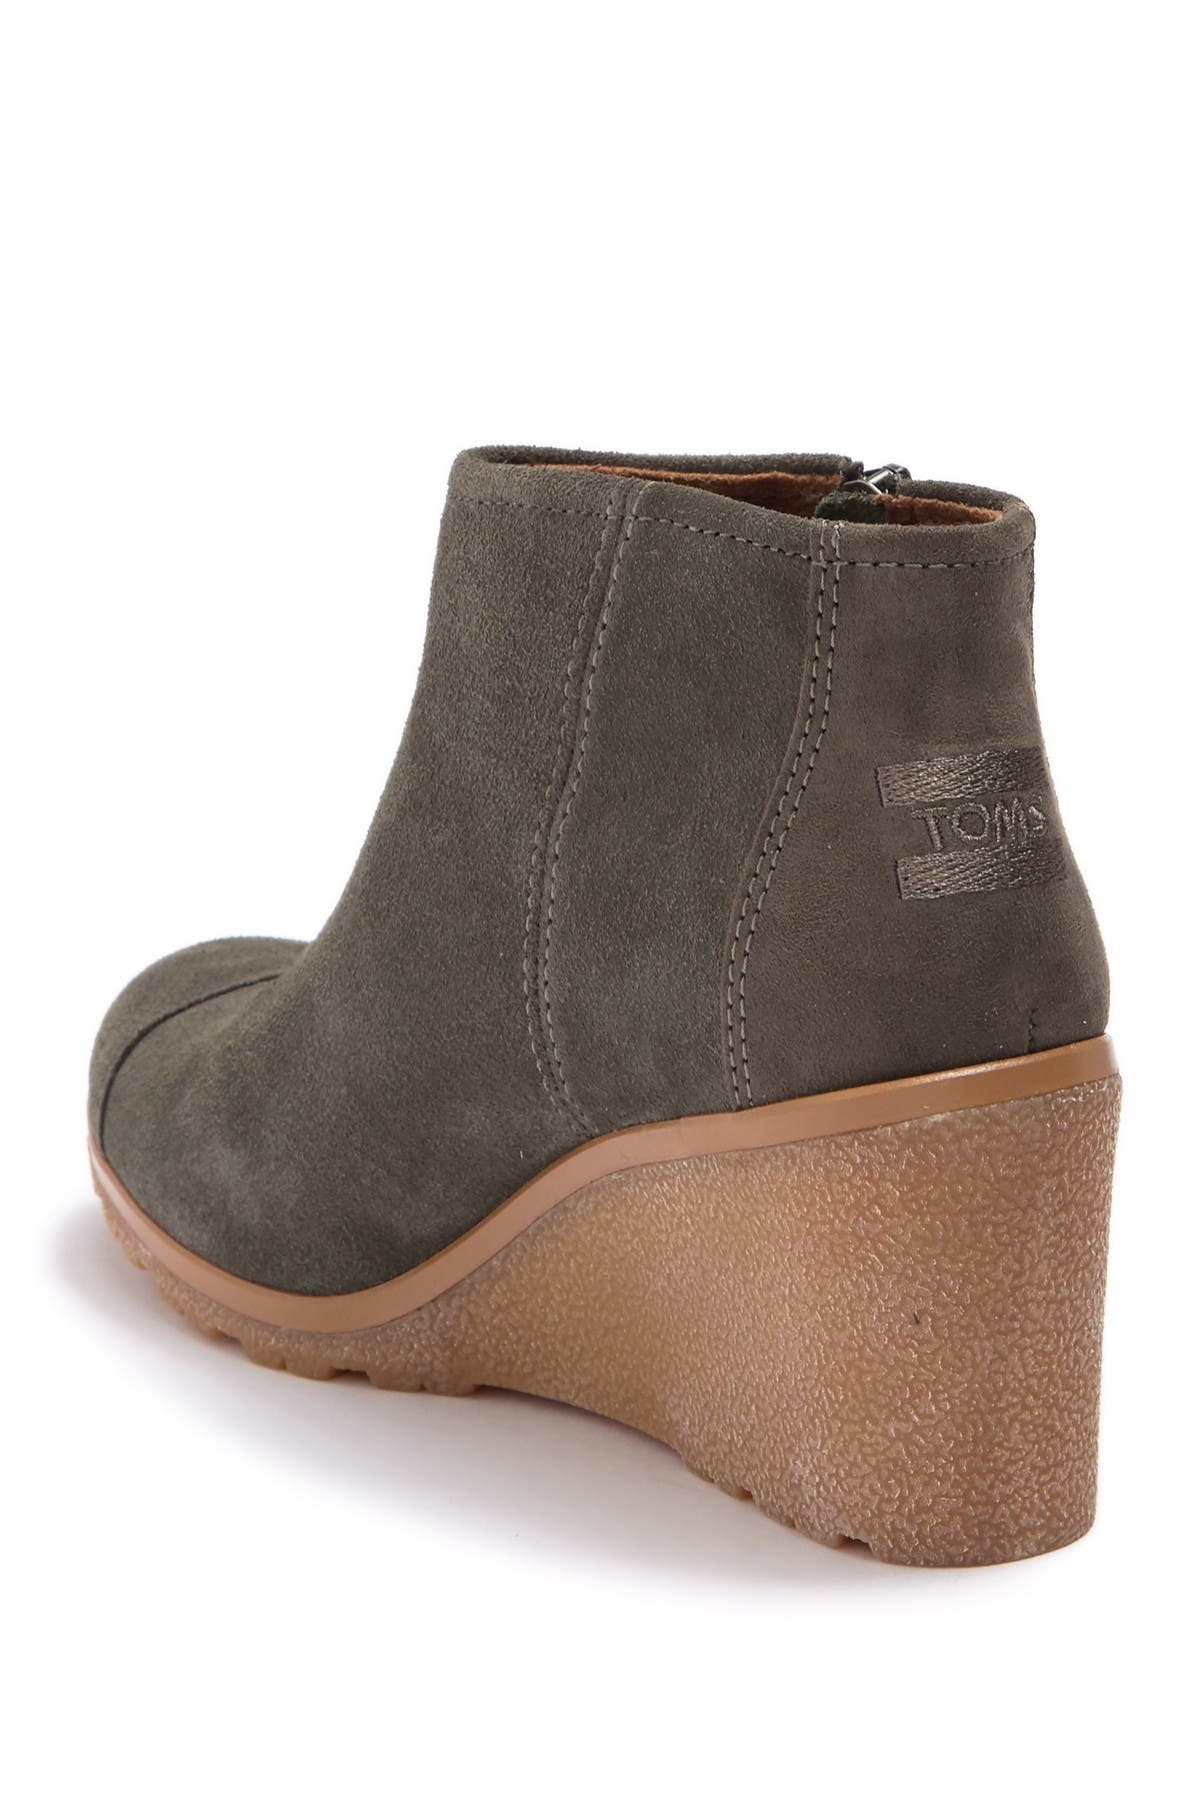 toms avery wedge booties